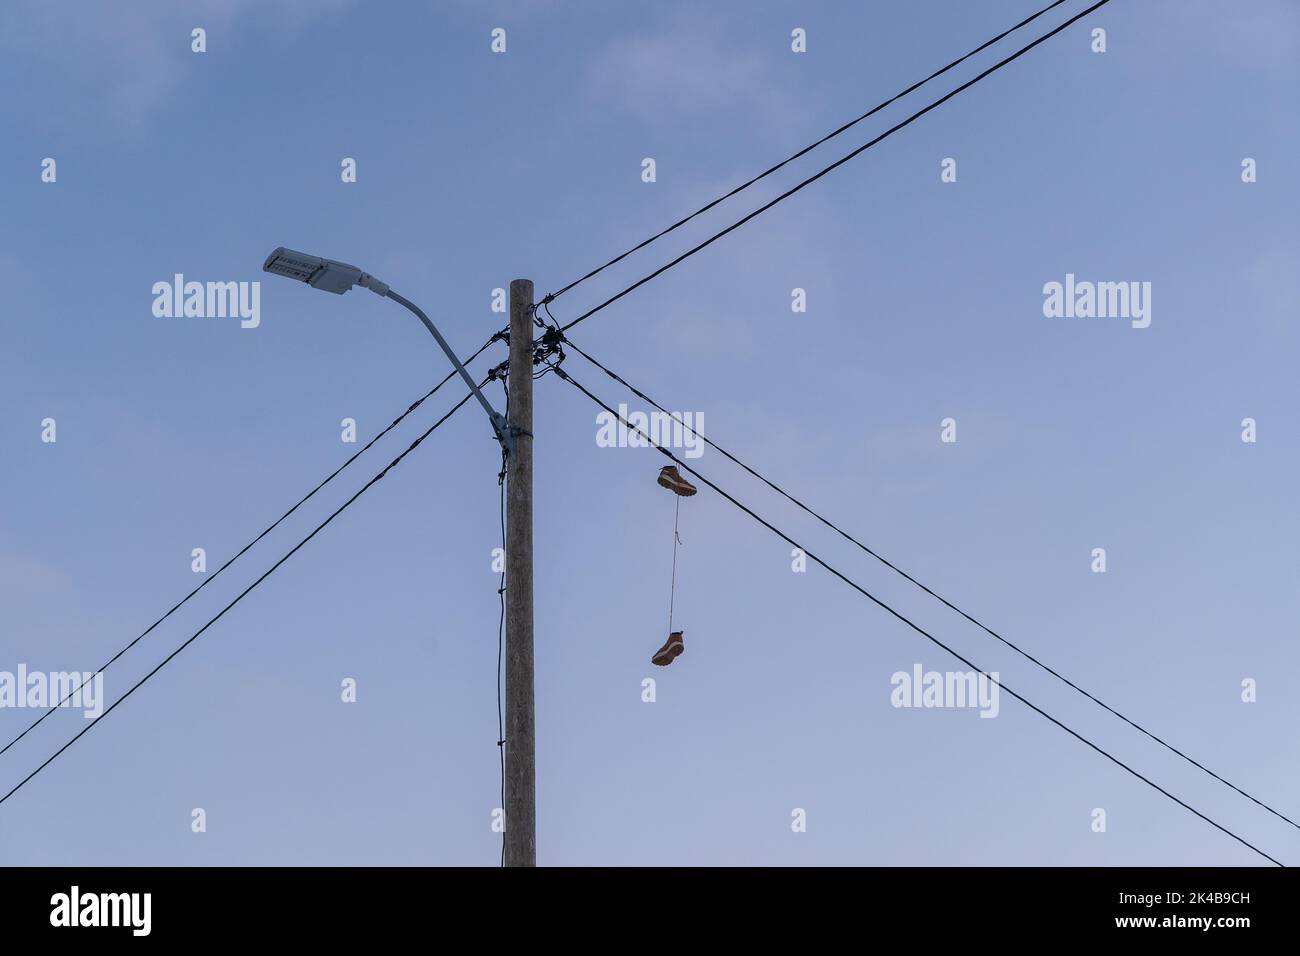 Hanging shoes from cables, perhaps the northern-most Stock Photo